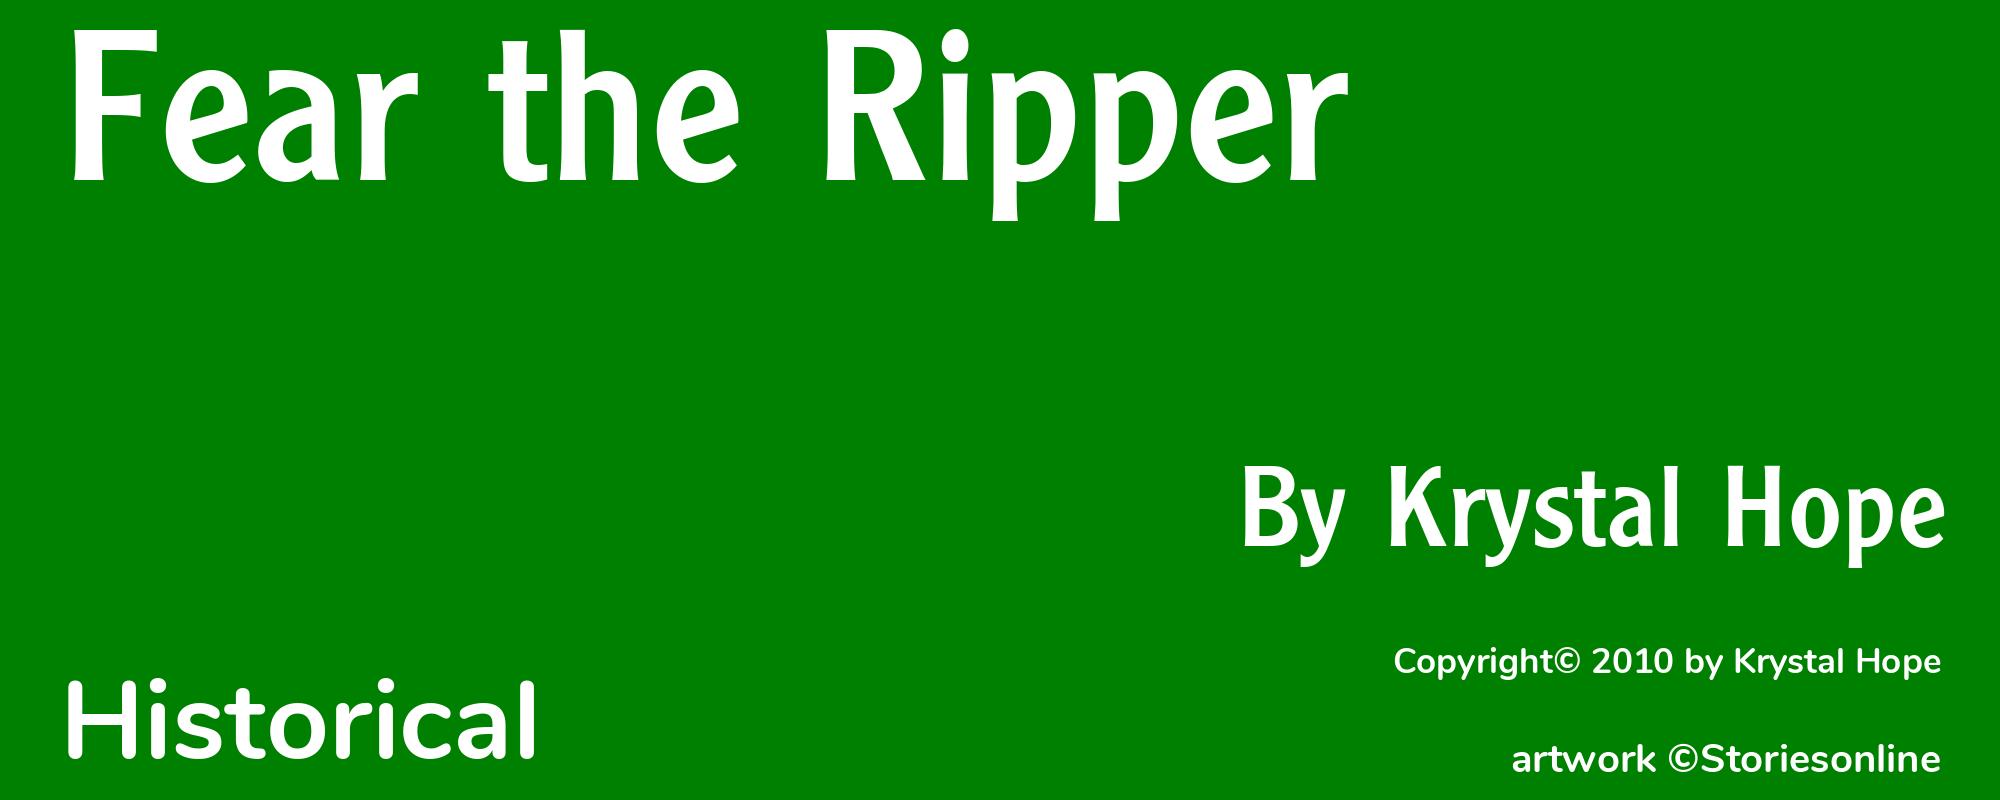 Fear the Ripper - Cover